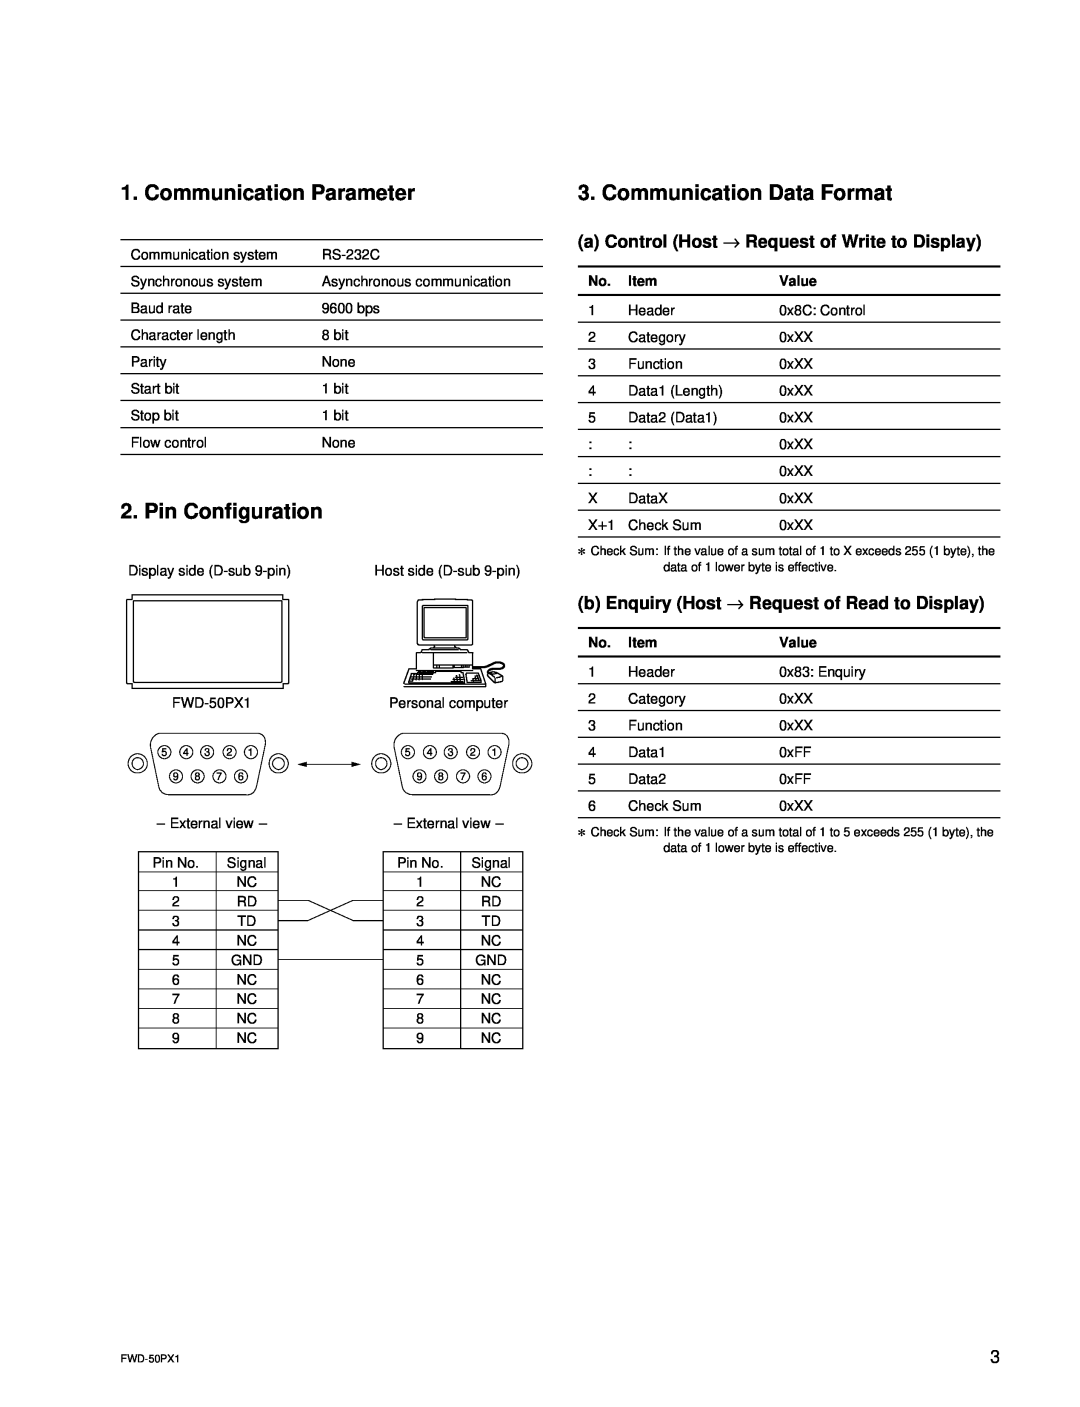 Sony FWD-50PX1 manual Communication Parameter, Pin Configuration, Communication Data Format 